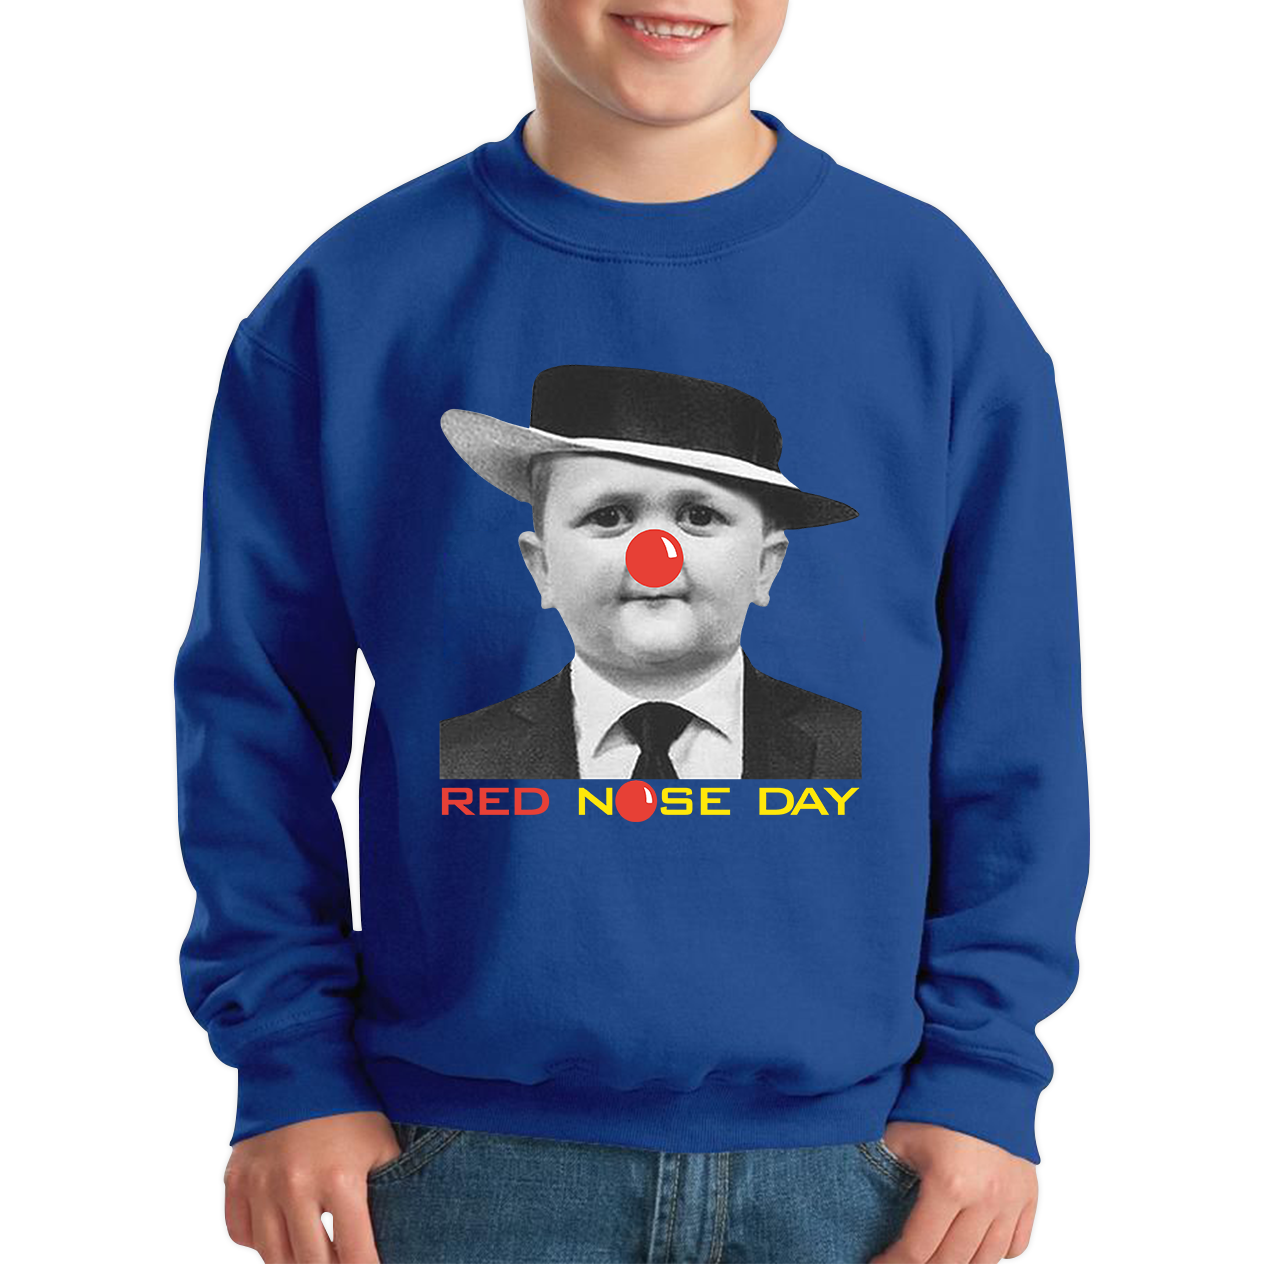 Hasbulla Magomedov MMA Fighter Red Nose Day Kids Sweatshirt. 50% Goes To Charity